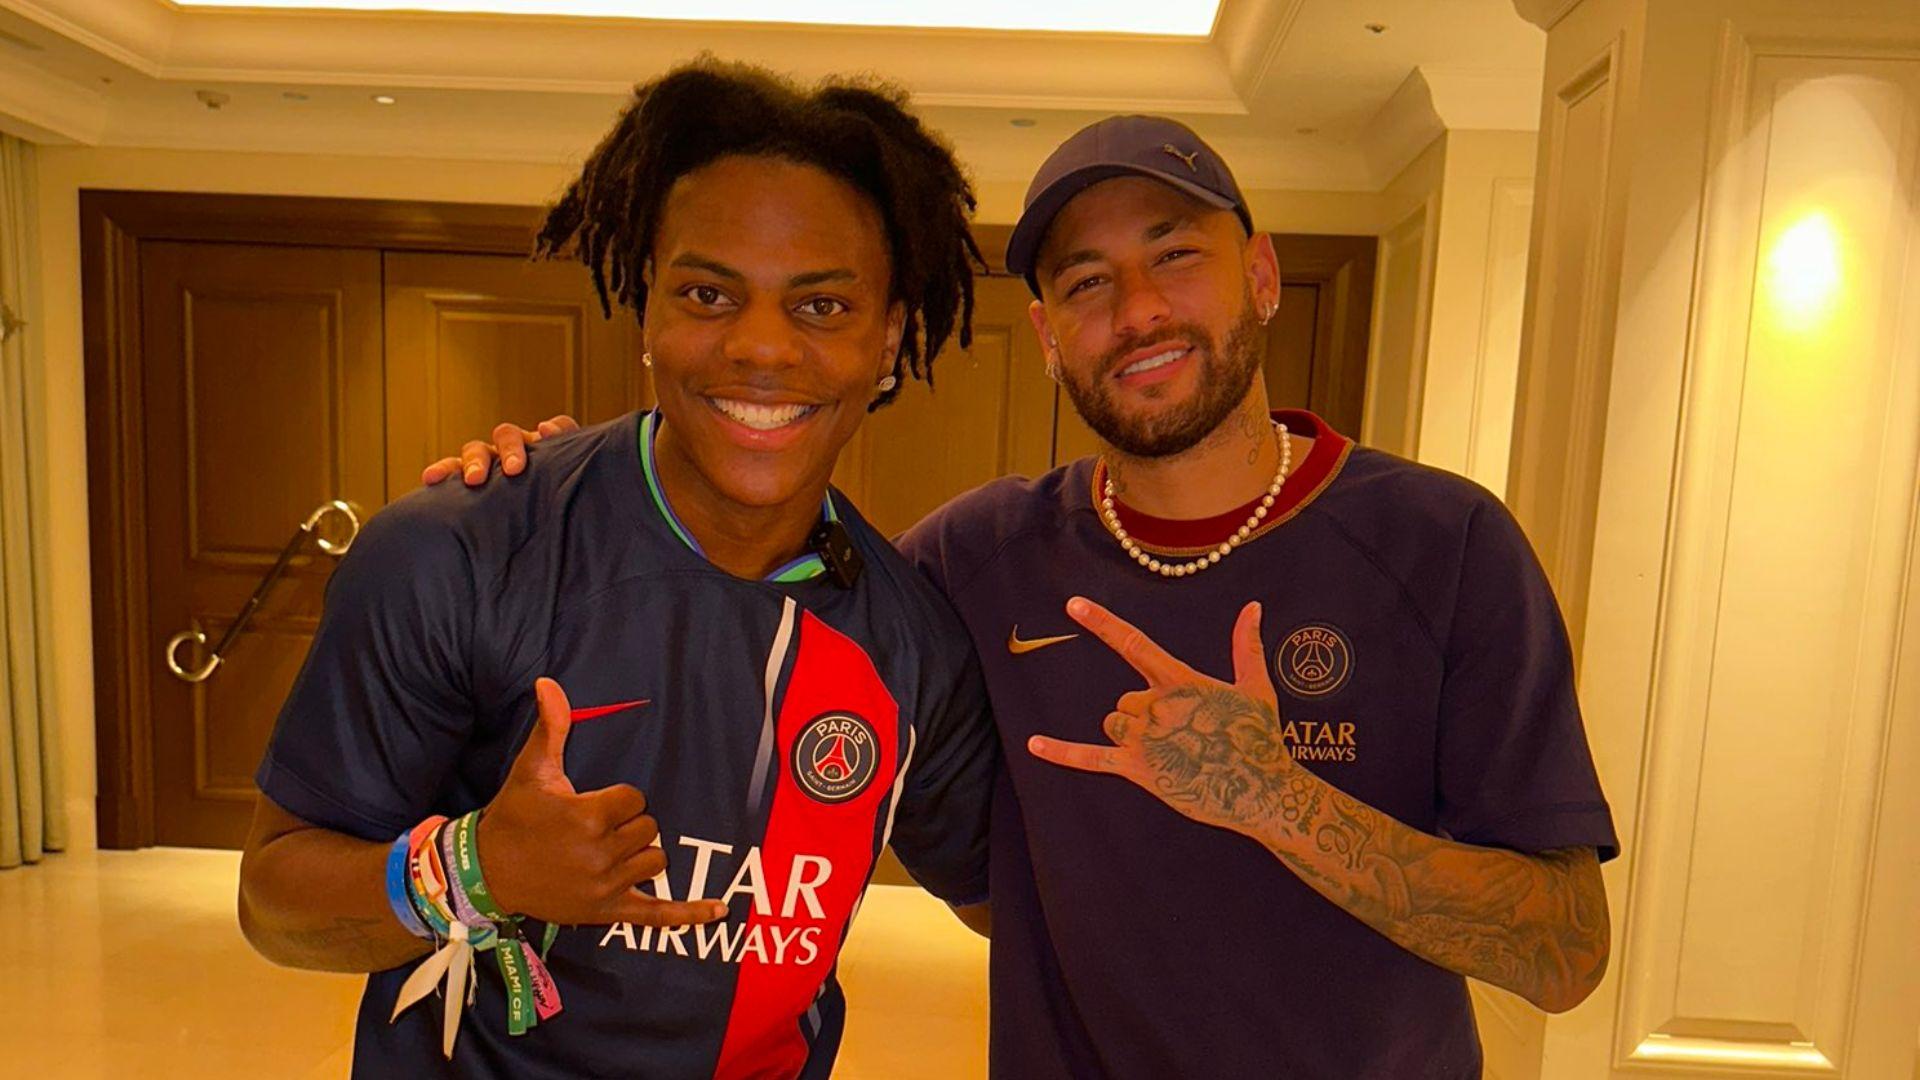 IShowSpeed and Neymar in PSG jerseys posing for camera